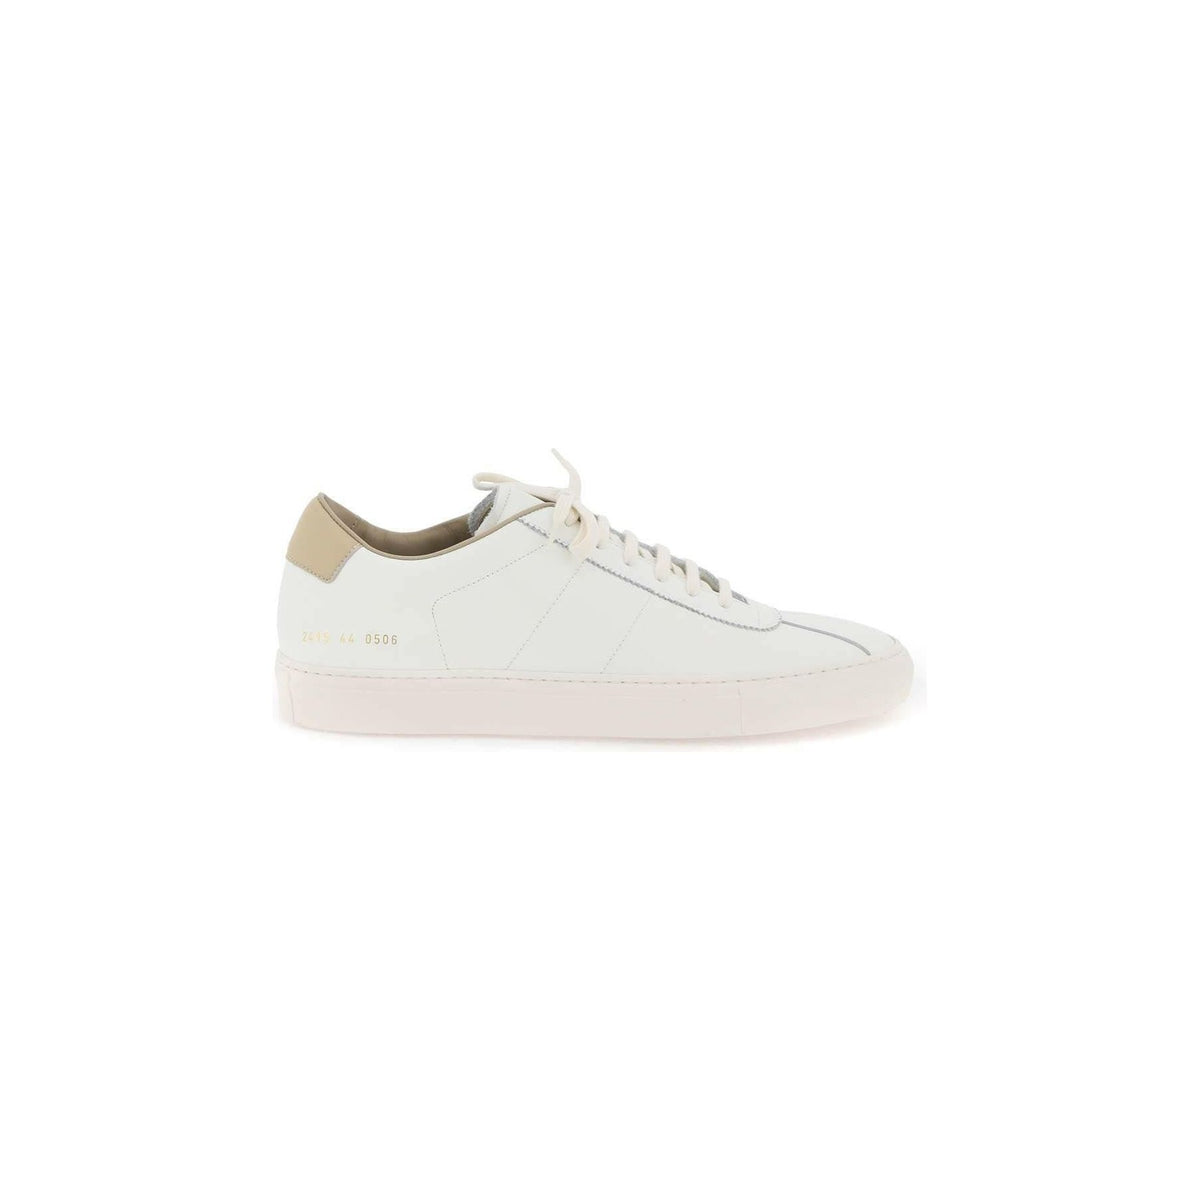 COMMON PROJECTS - White 70's Tennis Smooth Leather Sneakers - JOHN JULIA